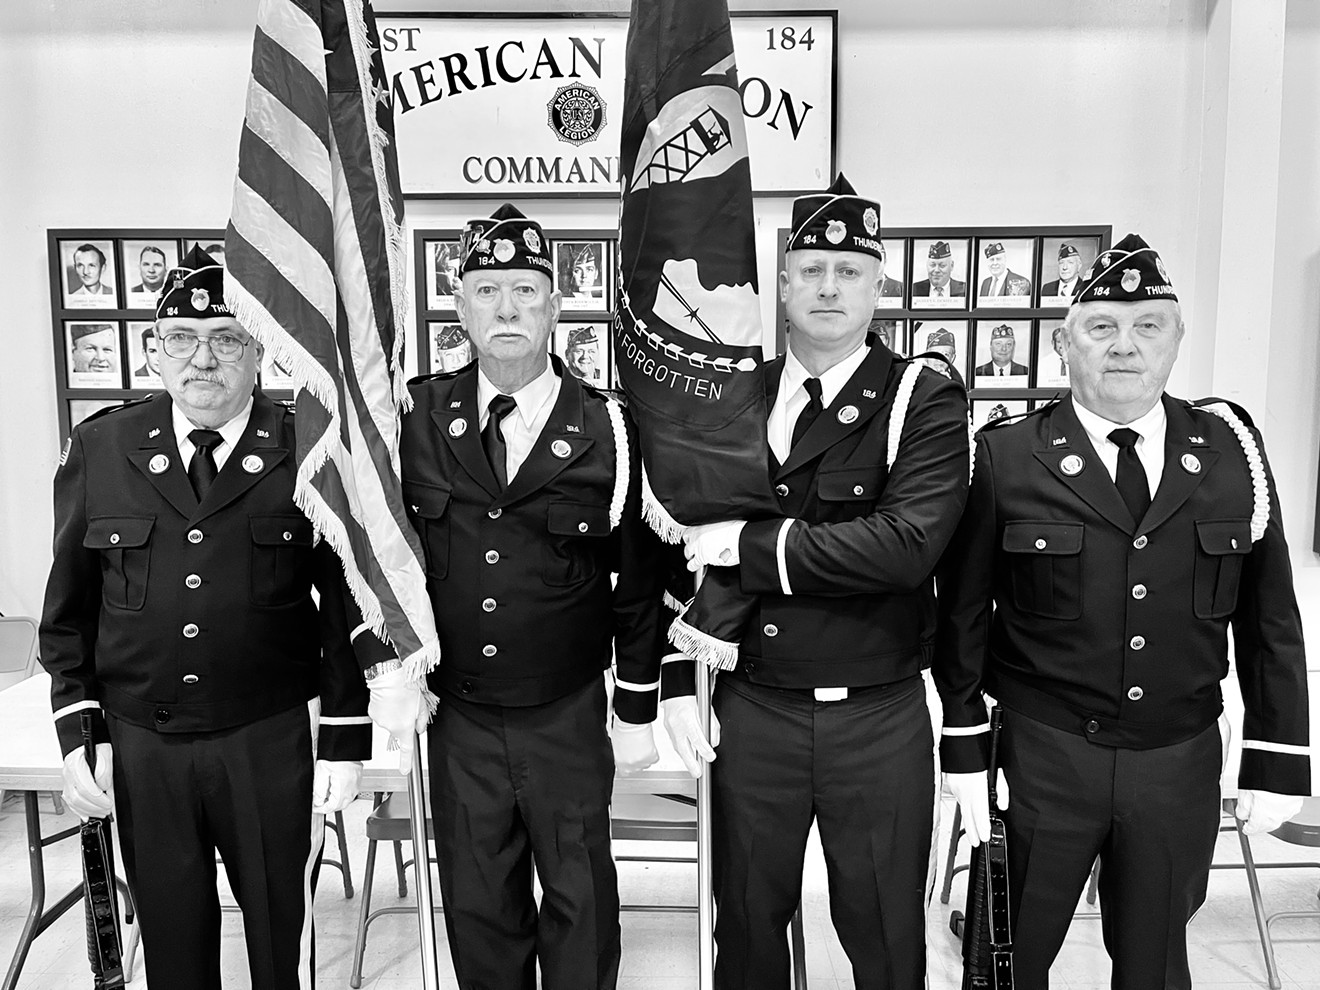 Twentieth Year Remembrance of September 11,2001 at American Legion Post 184